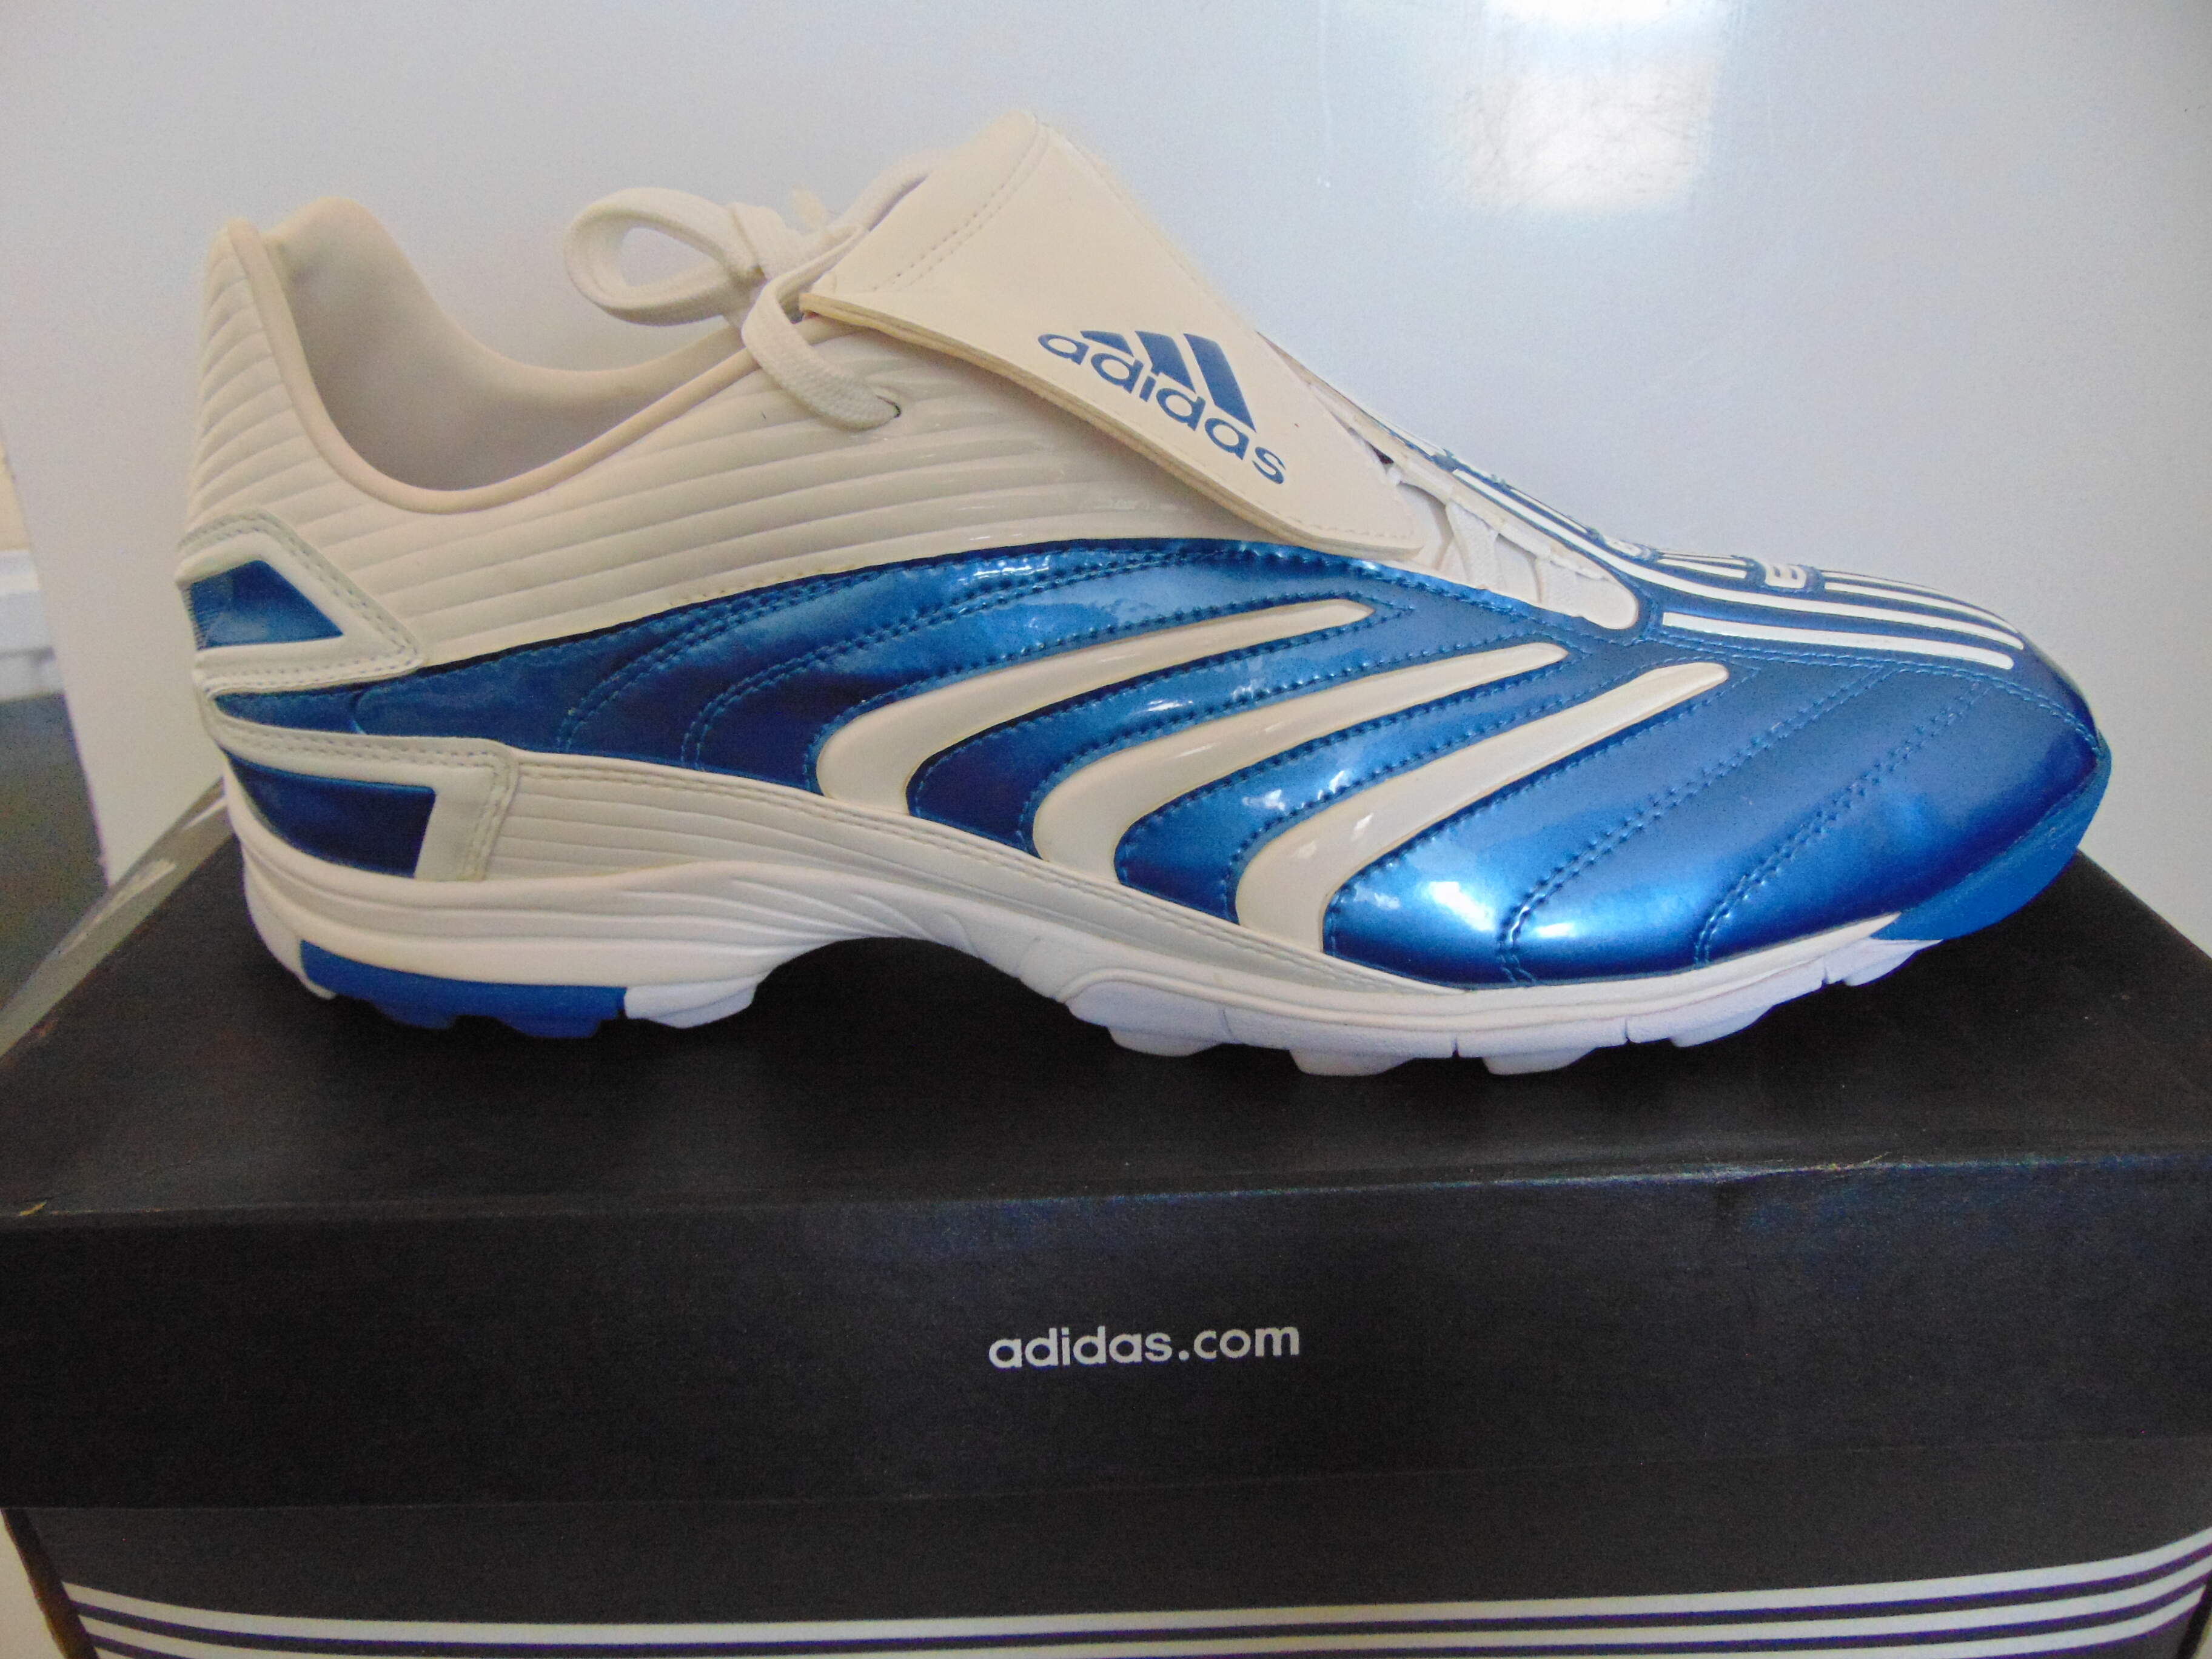 Adidas Absolado TRX TF Football Boots On Sale only 39.99 EX shop size UK 13